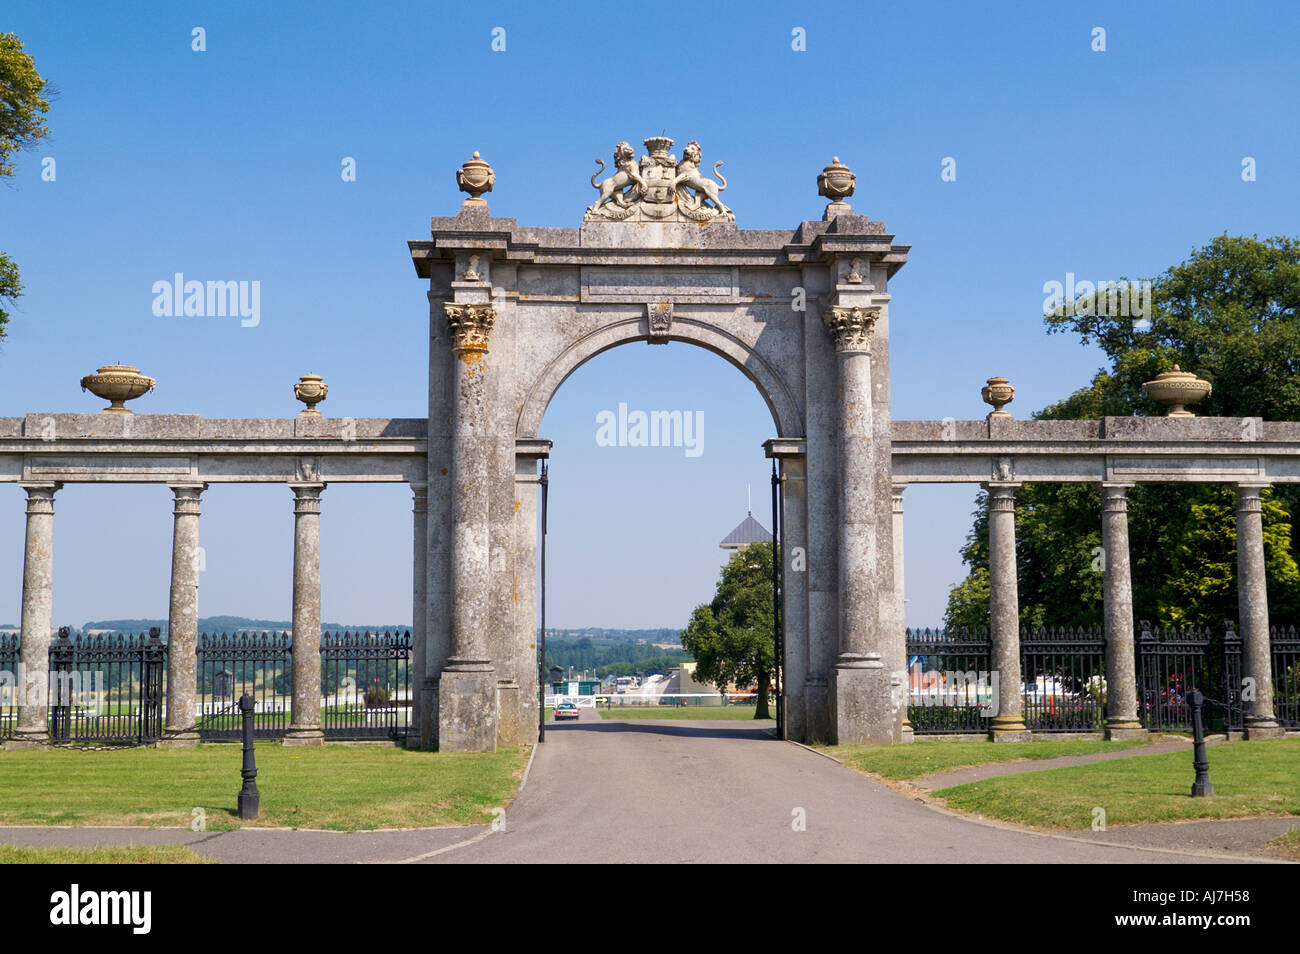 Entrance archway to Towcester race course Northamptonshire England Stock Photo